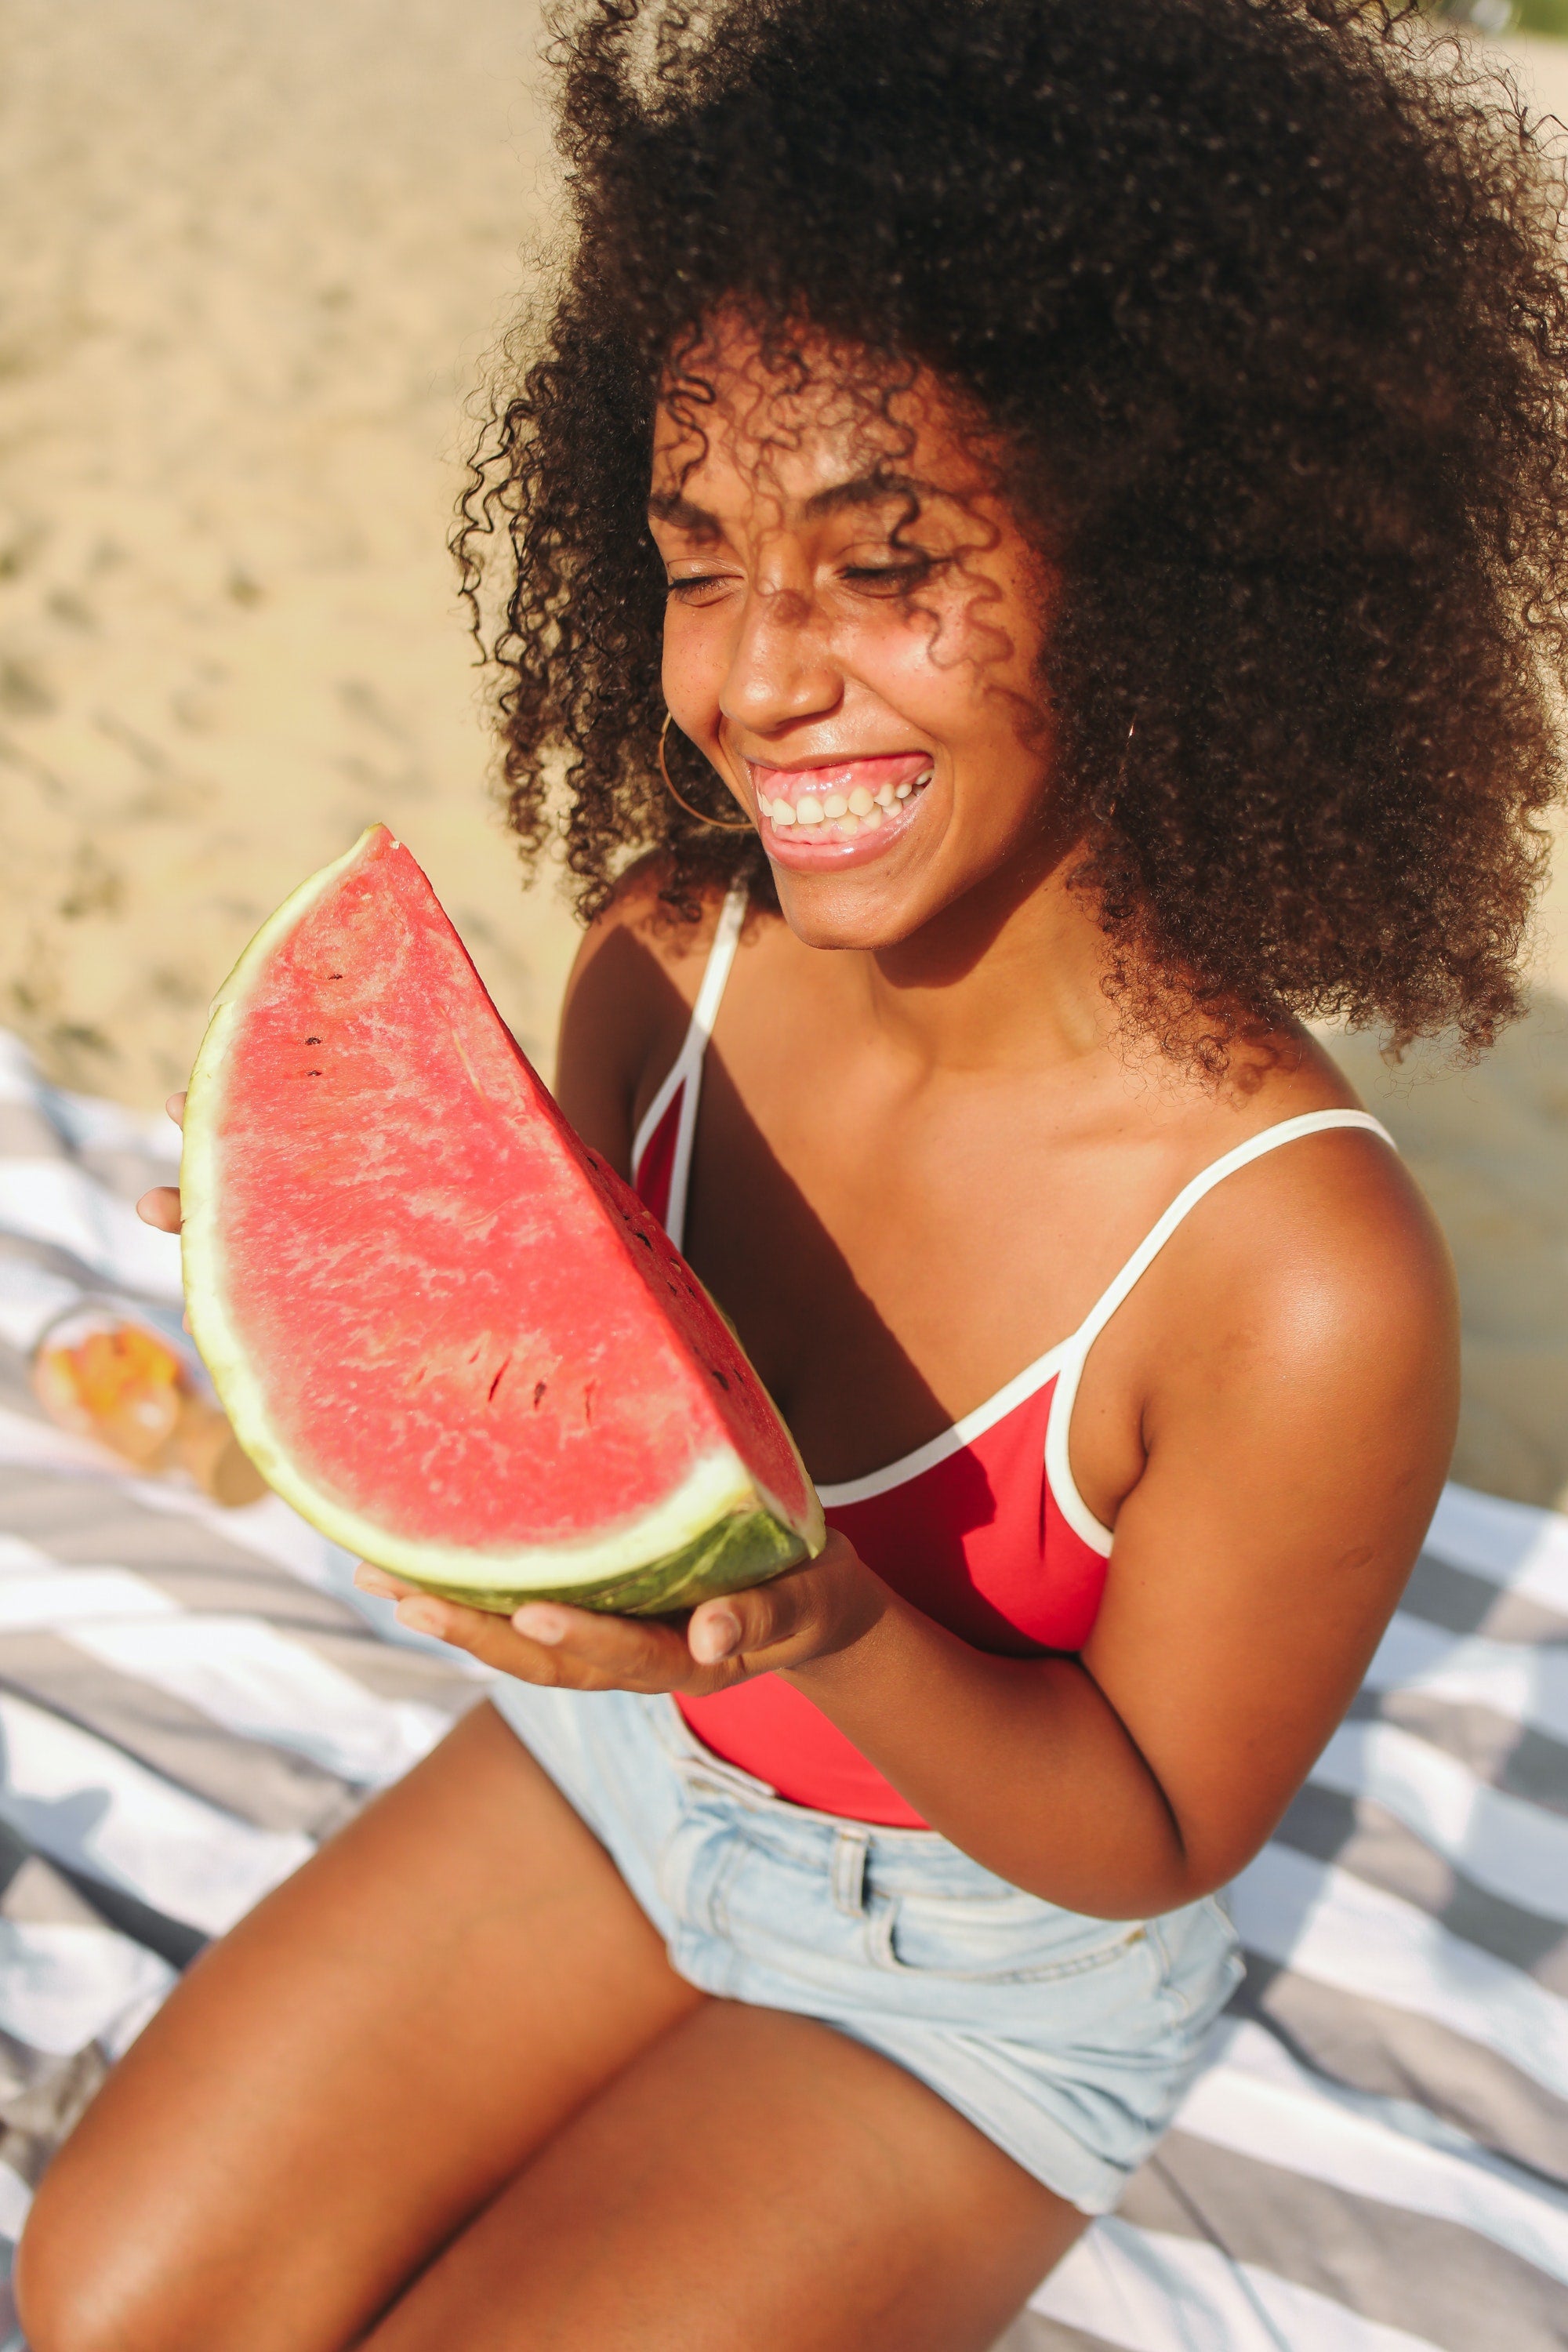 Not just a delicious summer snack: how watermelons are also a delicious ingredient for your skincare